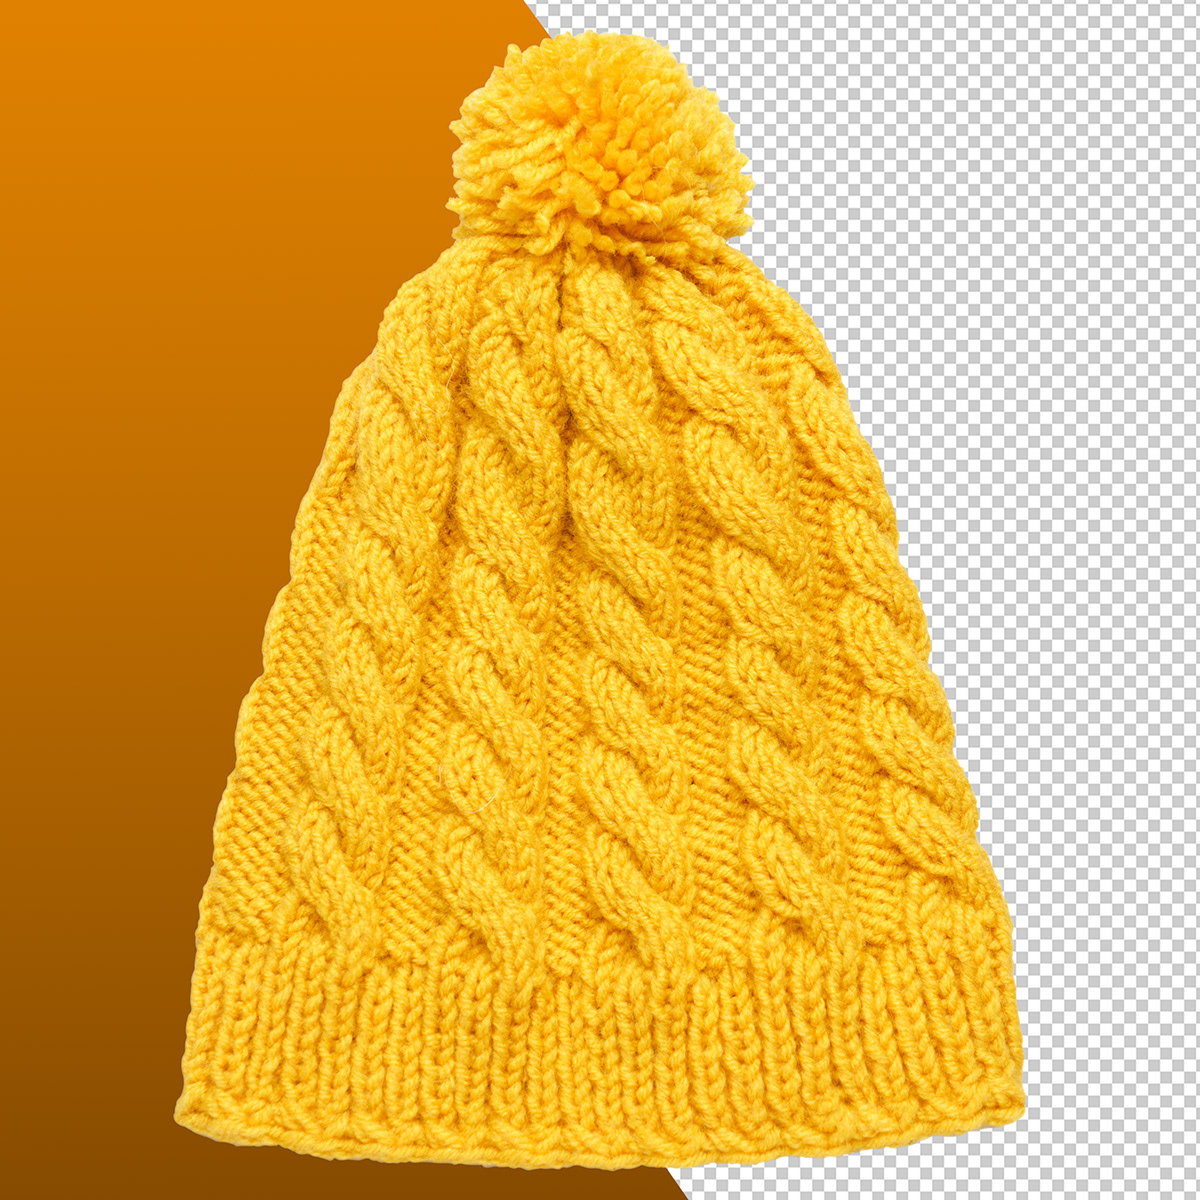 winter cap Clipping path Background Remove Photo Retouching Editing  Ecommerce ecommerce store baby cap Winter caps